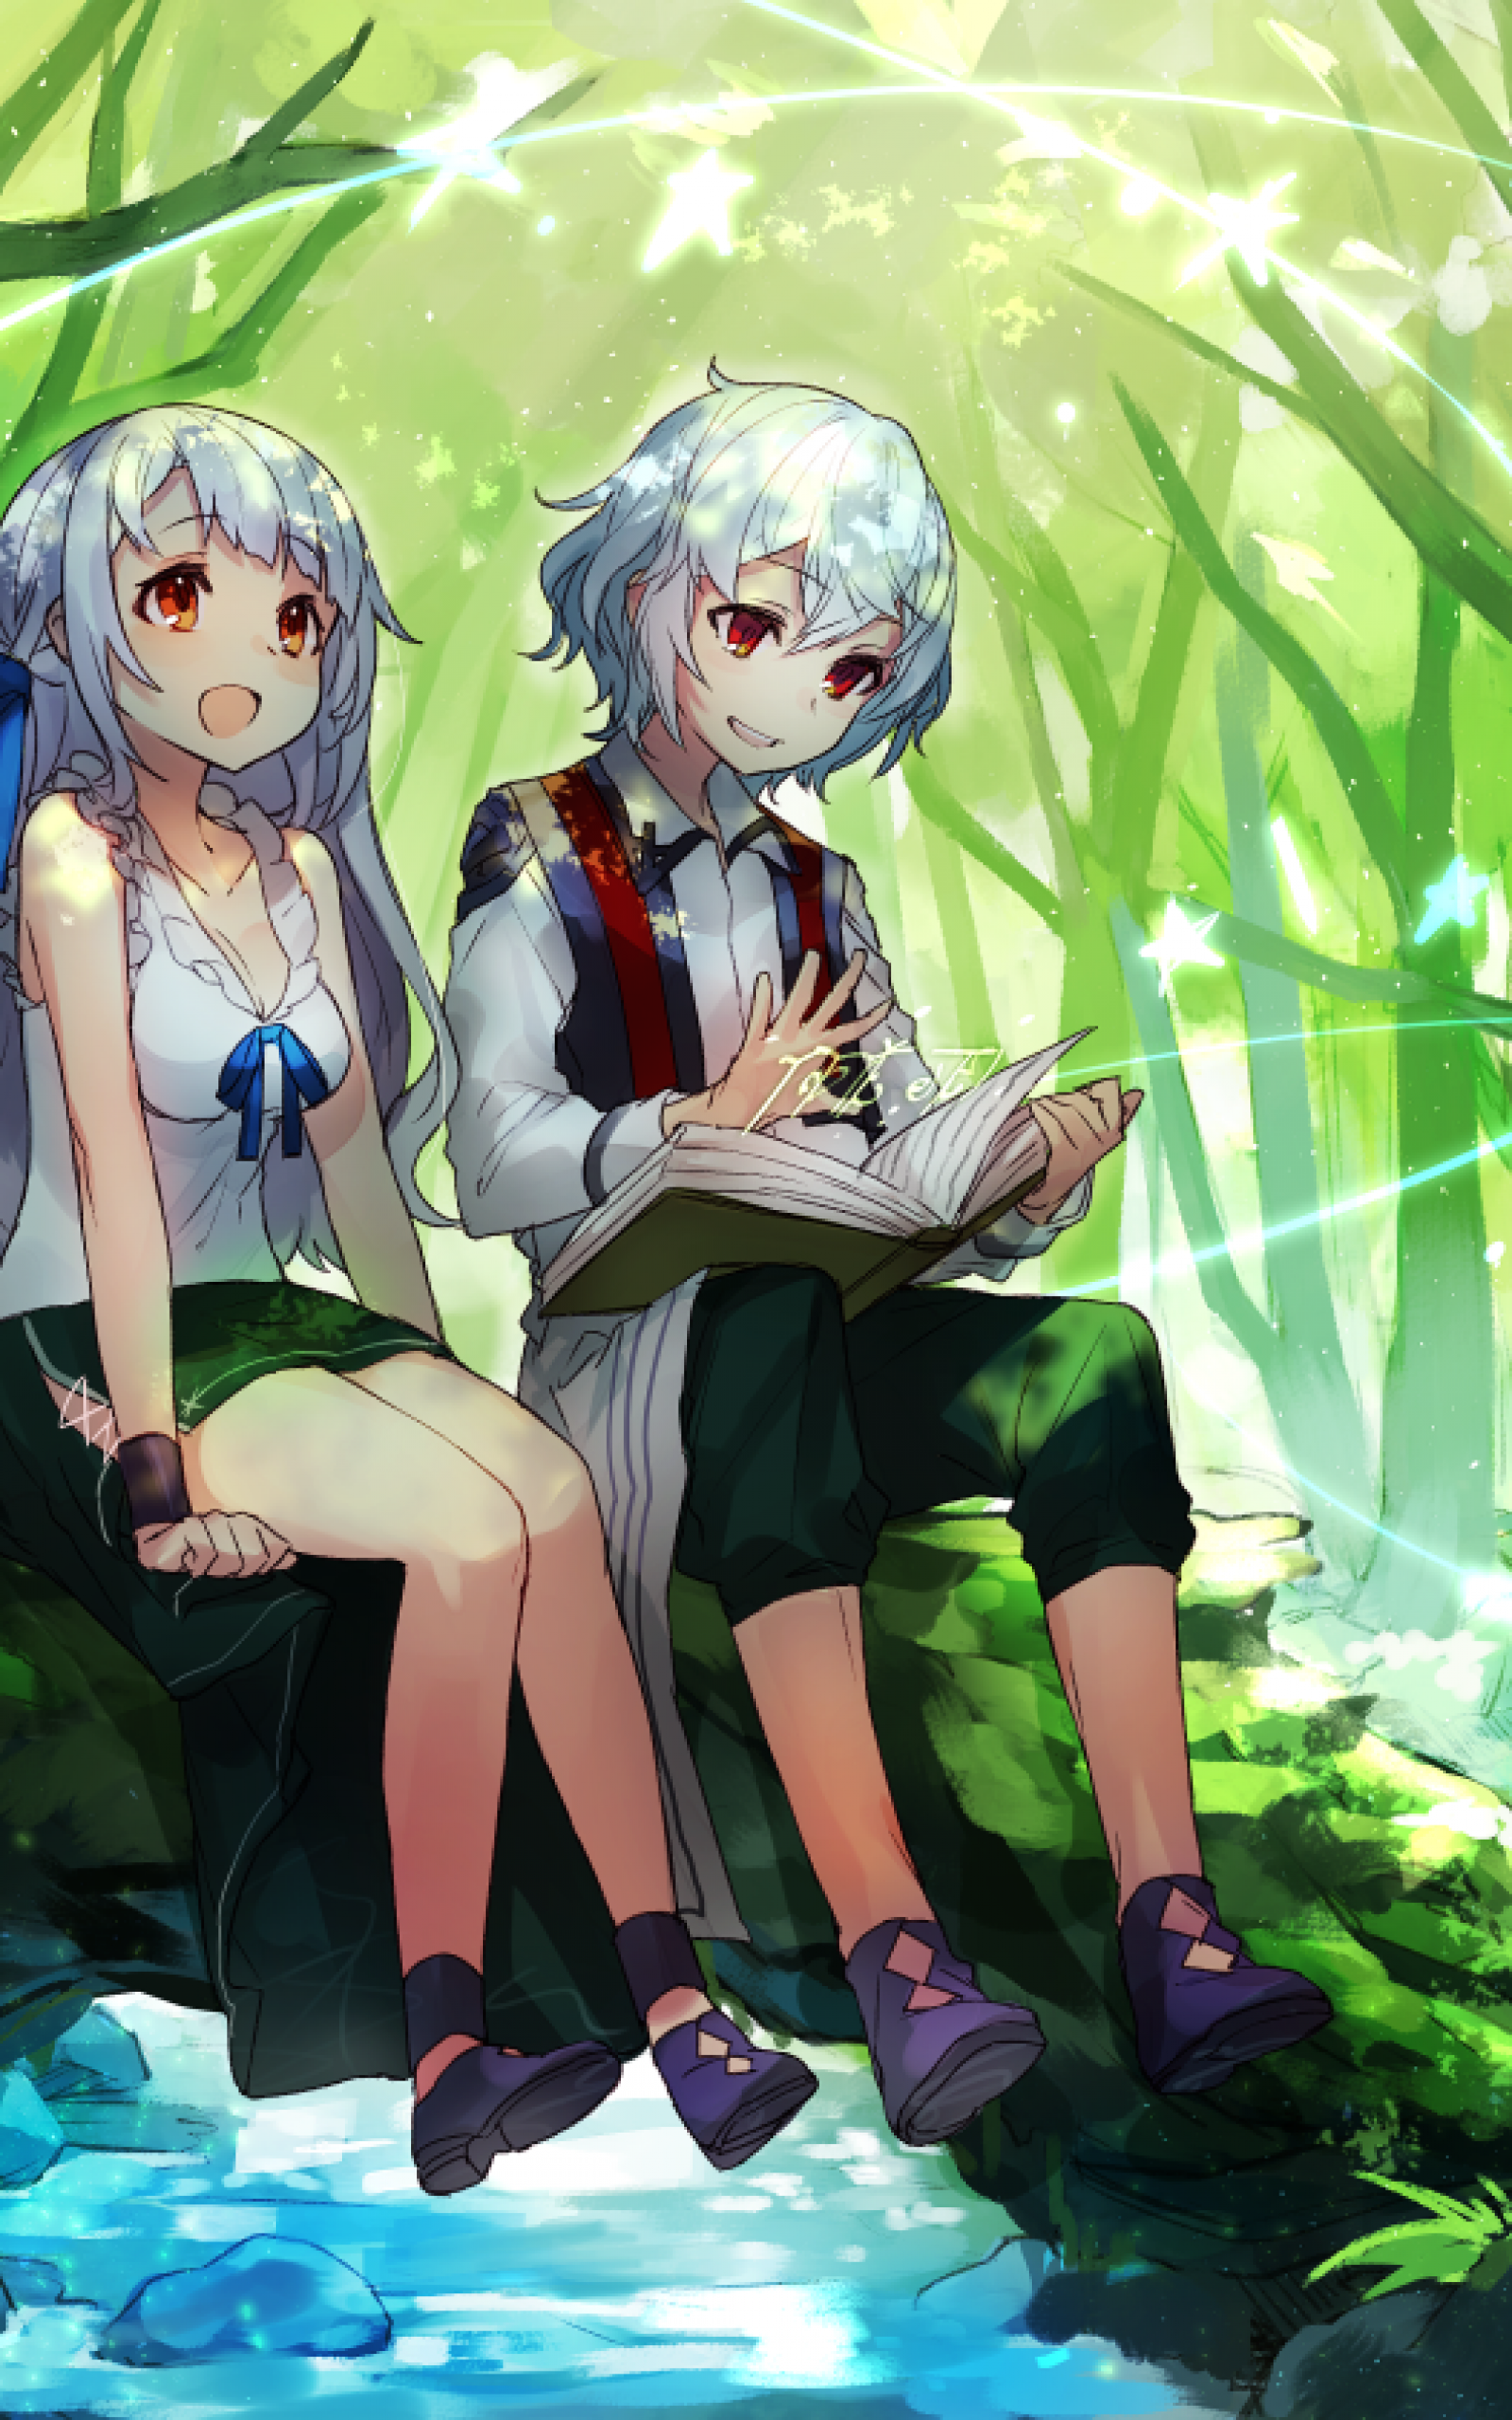 Download 1600x2560 Anime Twins, Girl And Boy, Forest, Reading A